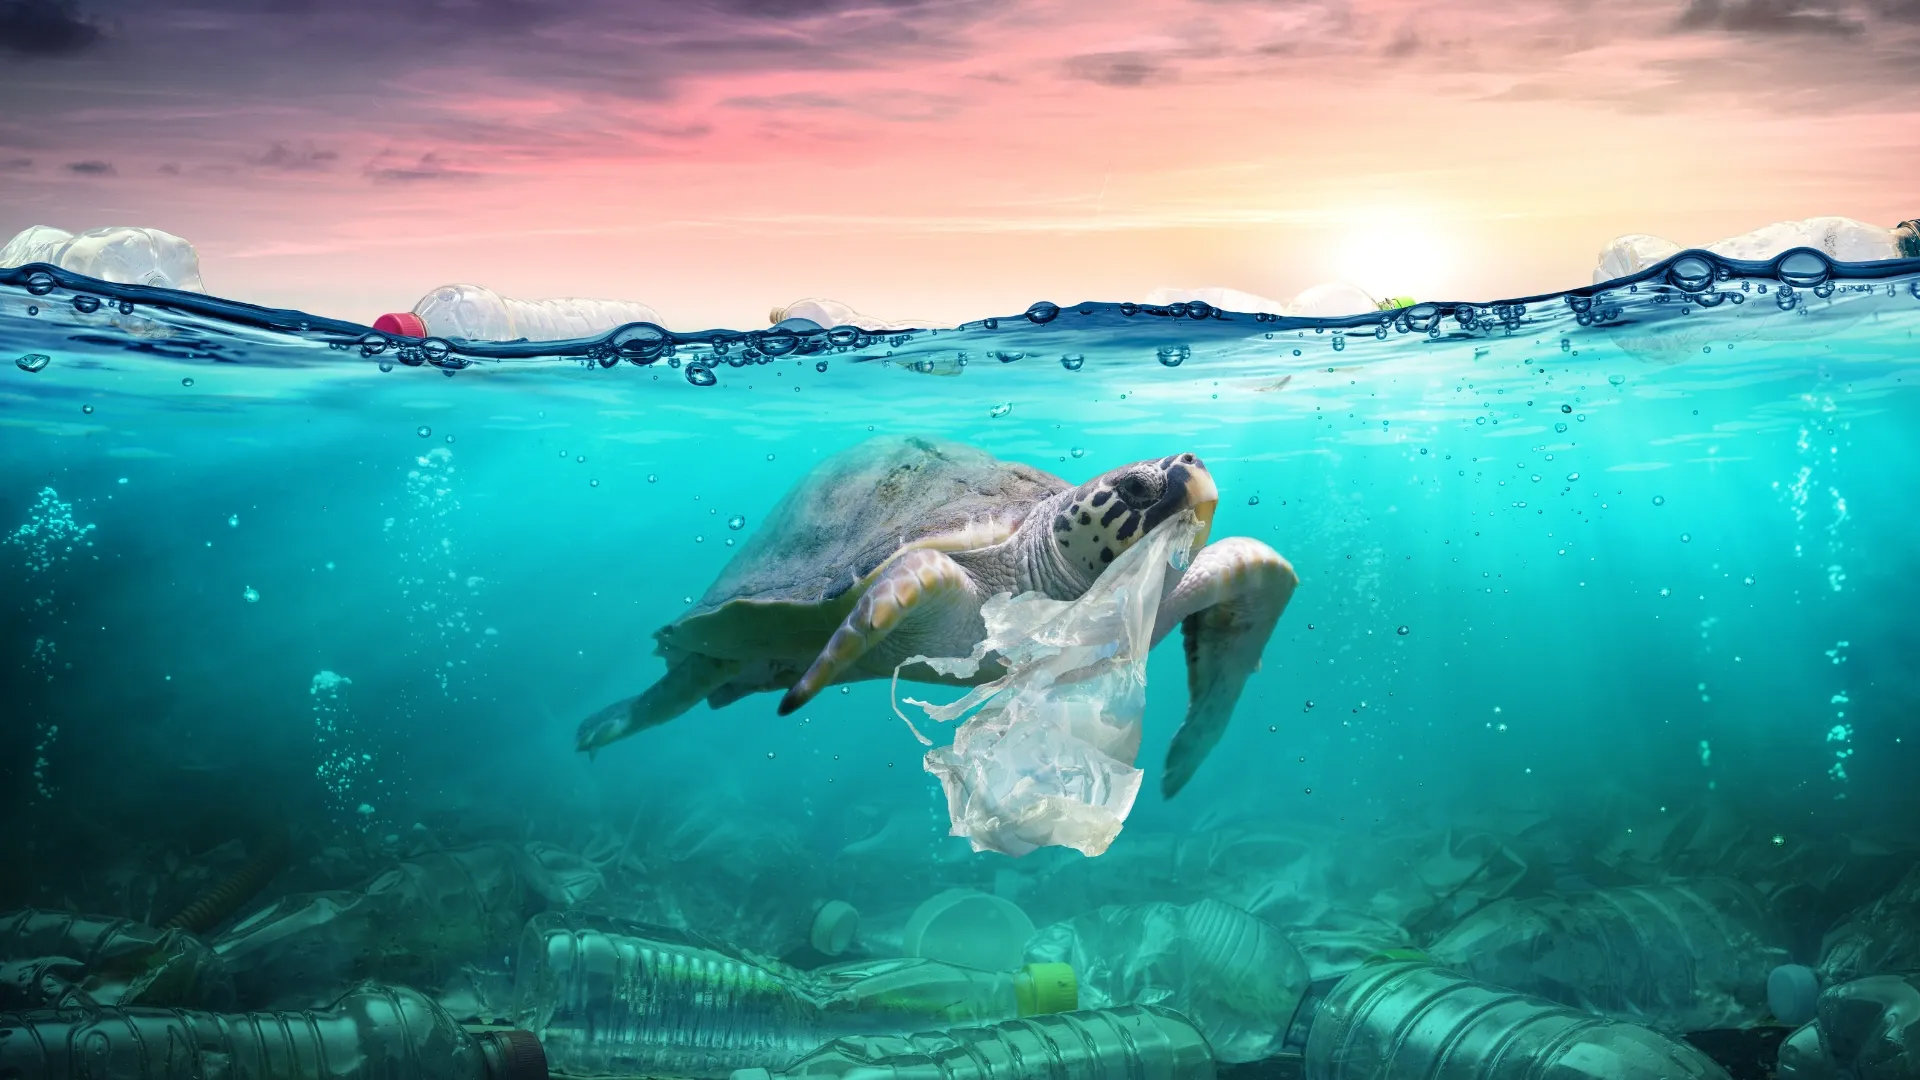 Photo of a Turtle carrying plastic in the ocean